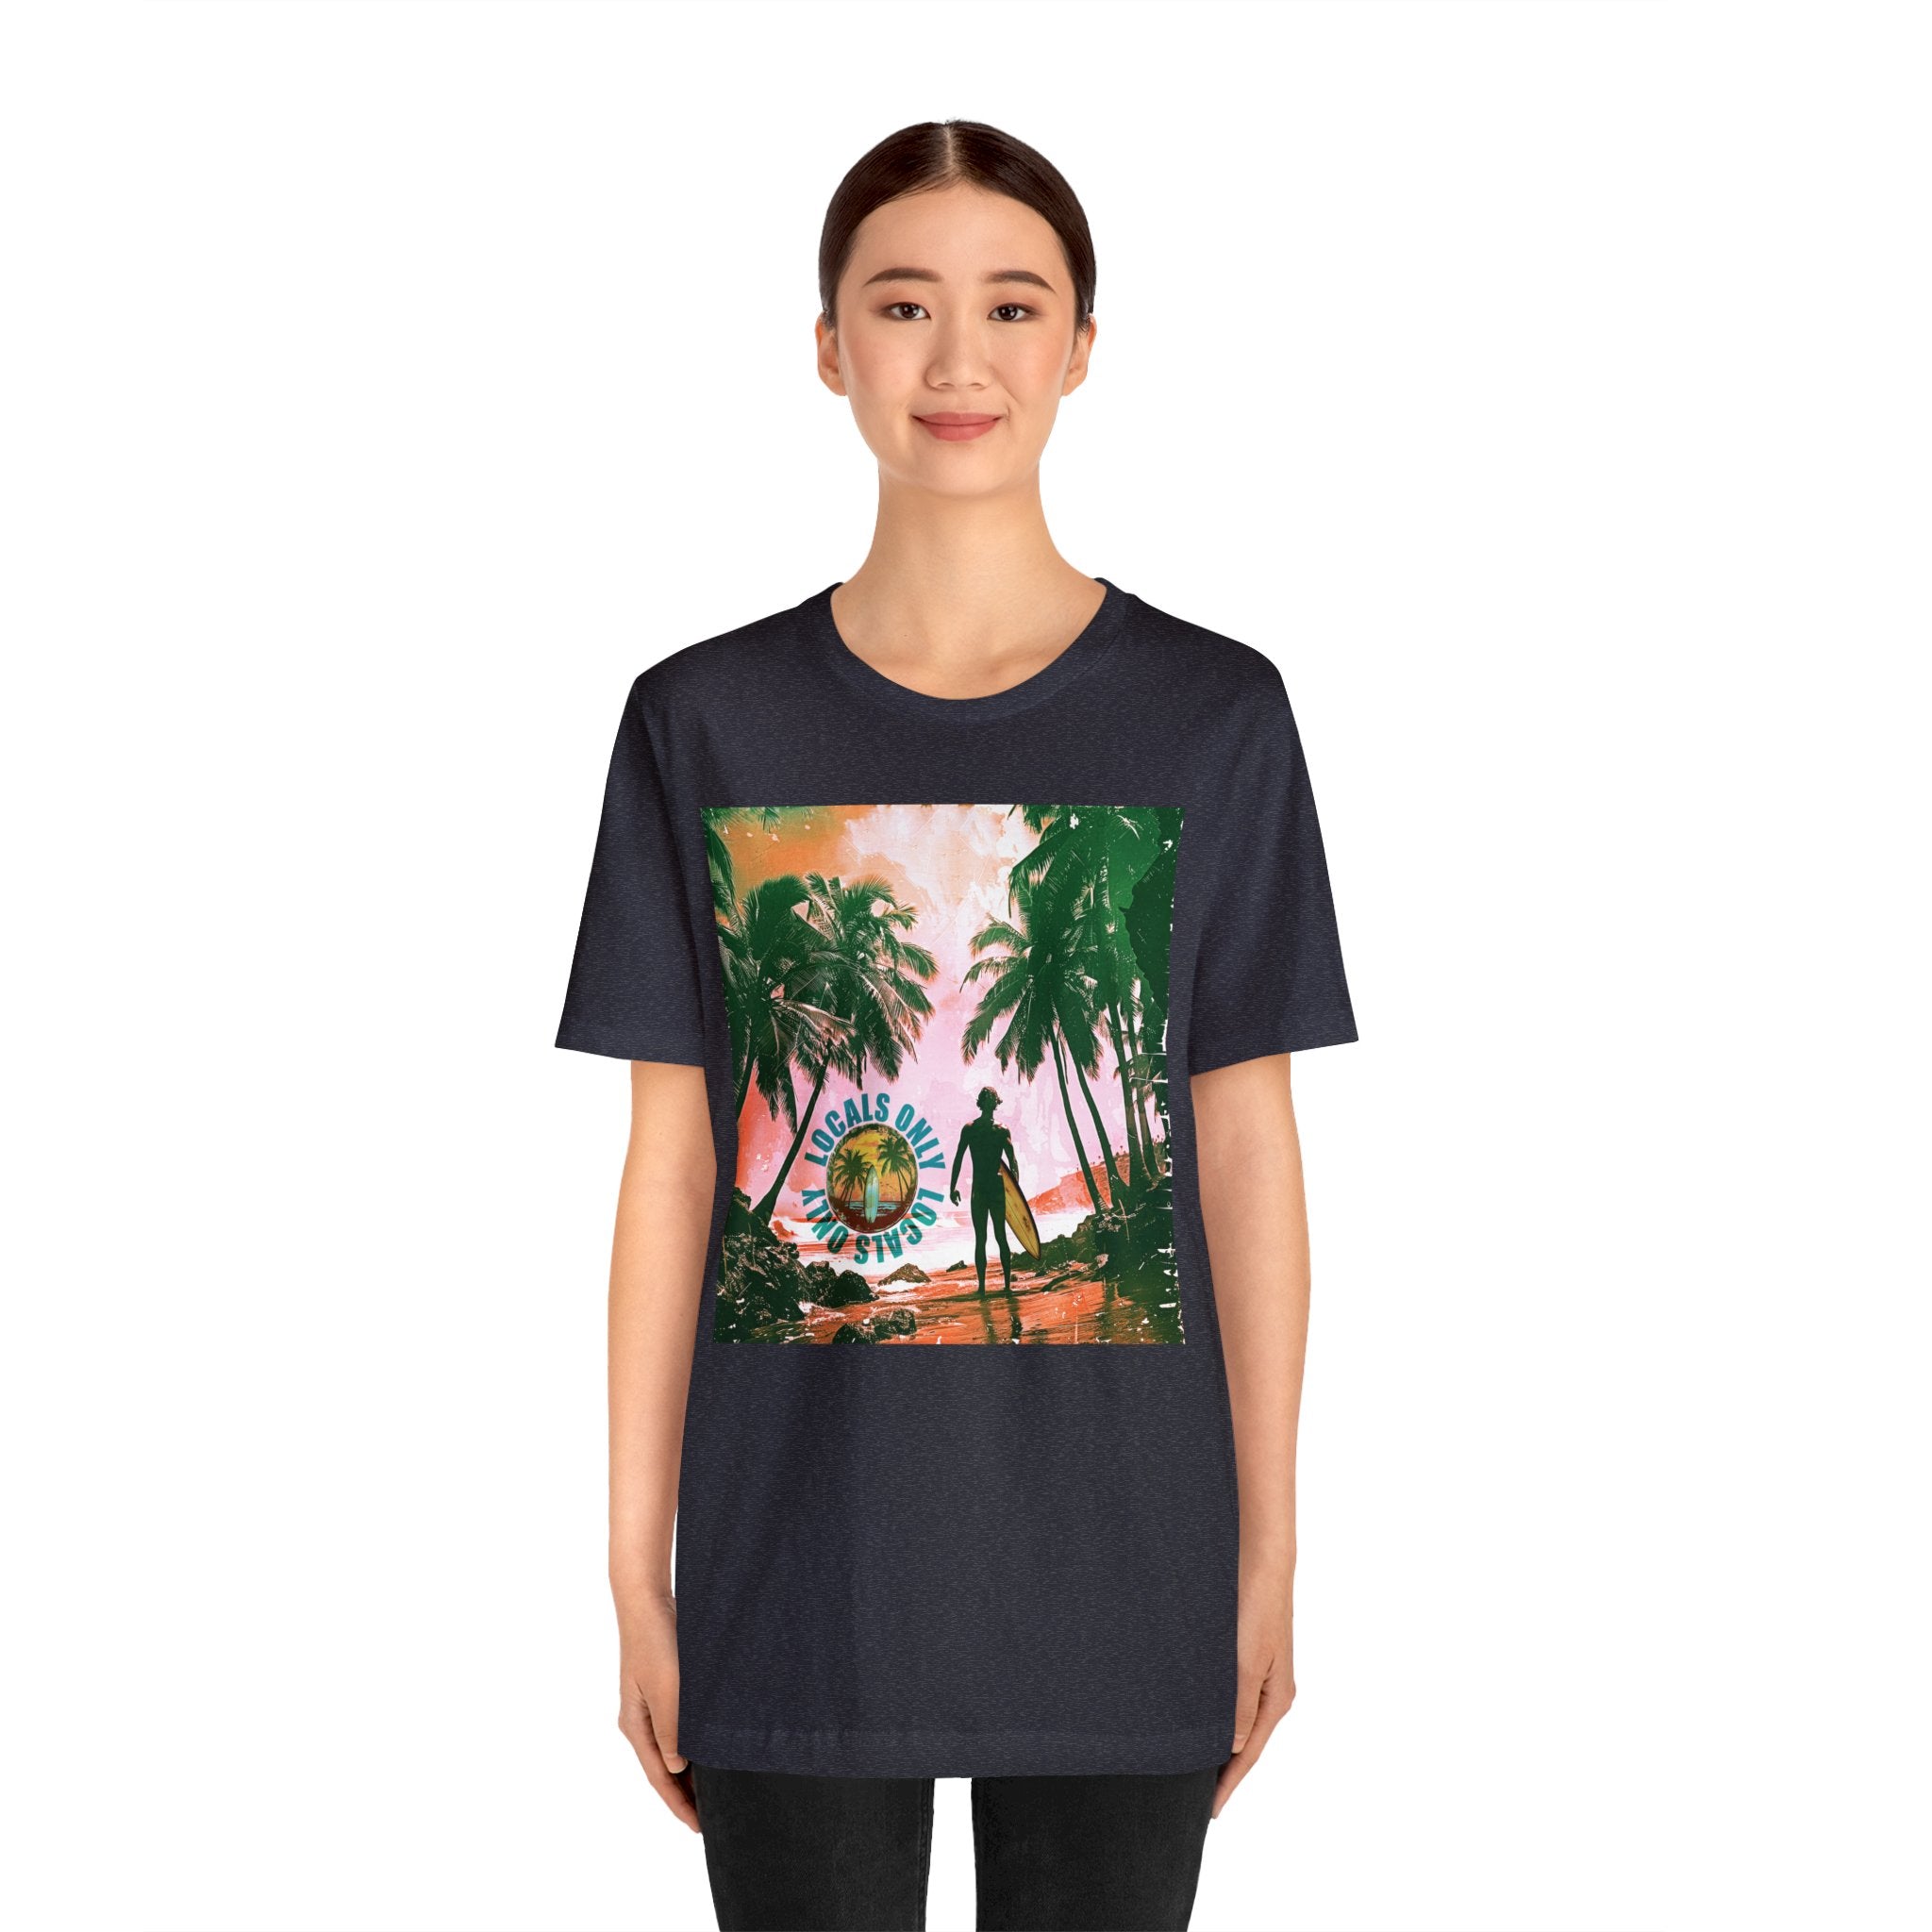 Beach scene with Locals Only stamp Unisex Jersey Short Sleeve Tee